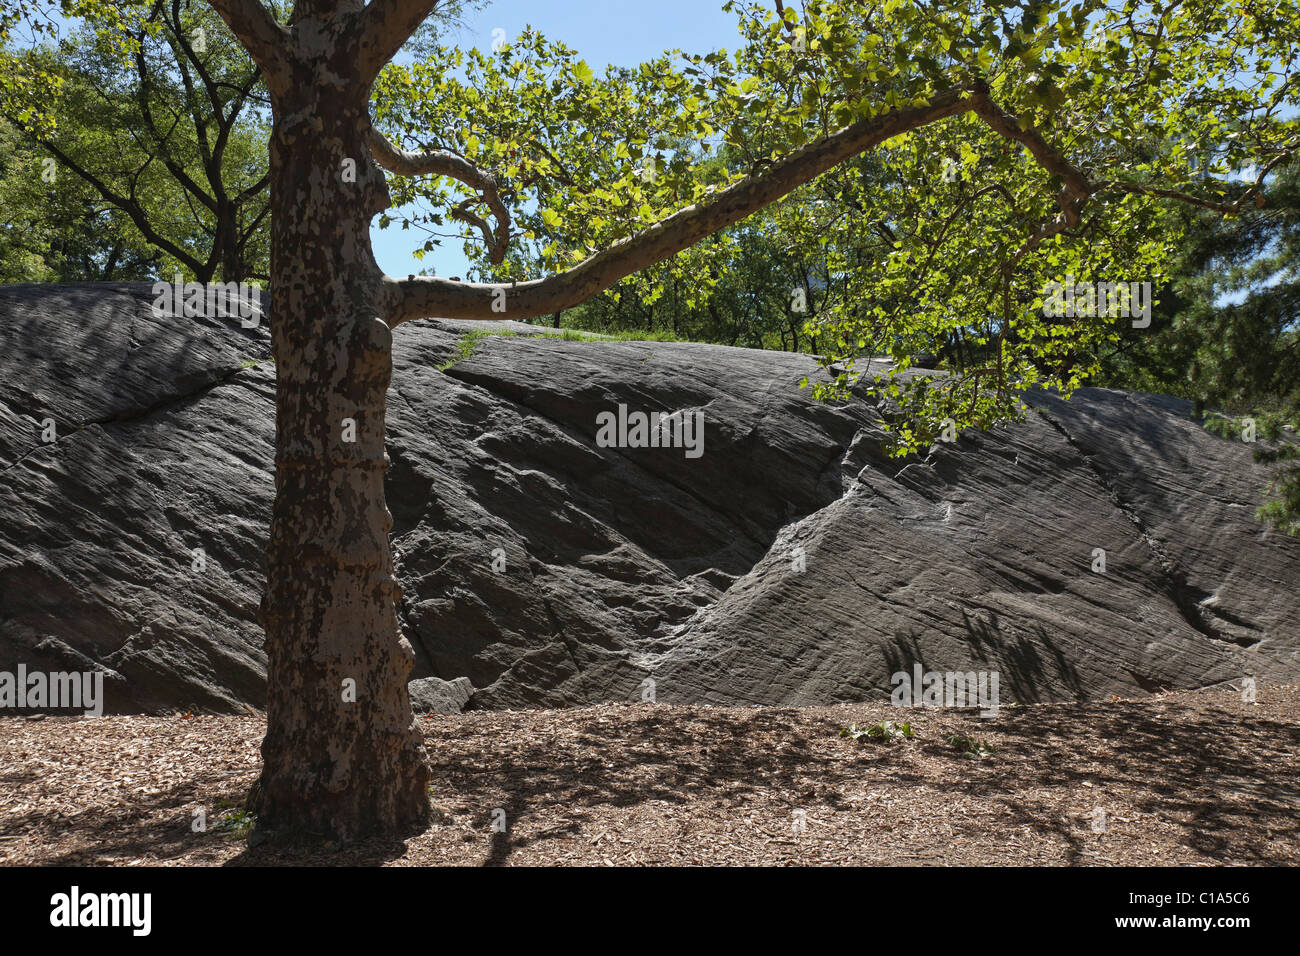 Sycamore Tree and granite outcropping in Central Park, New York City. Stock Photo